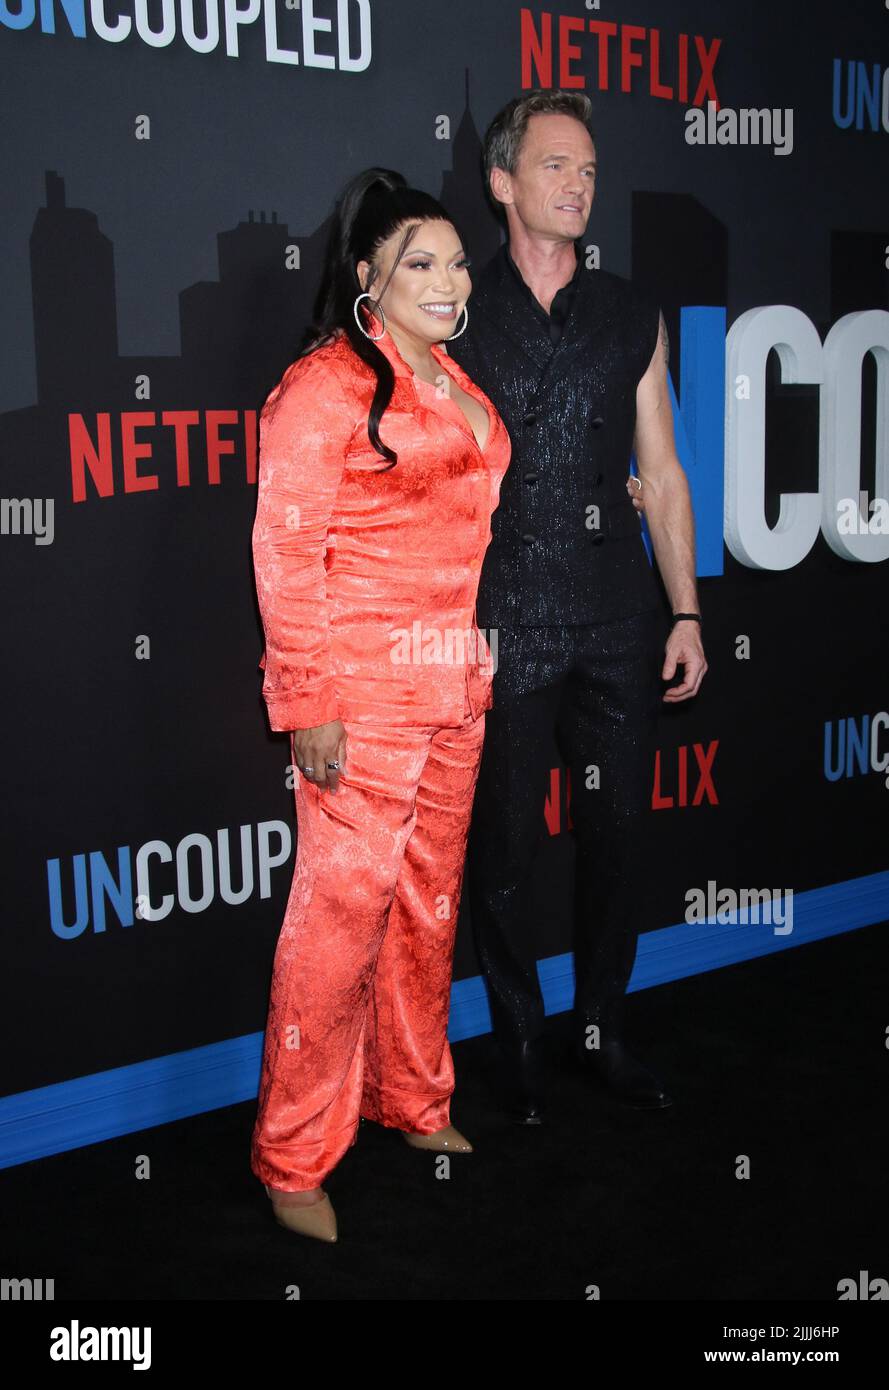 New York, NY, USA. 26th July, 2022. Tisha Campbell and Neil Patrick Harris at the Netflix Premiere Of Uncoupled at The Paris Theatre in New York City on July 26, 2022. Credit: Rw/Media Punch/Alamy Live News Stock Photo